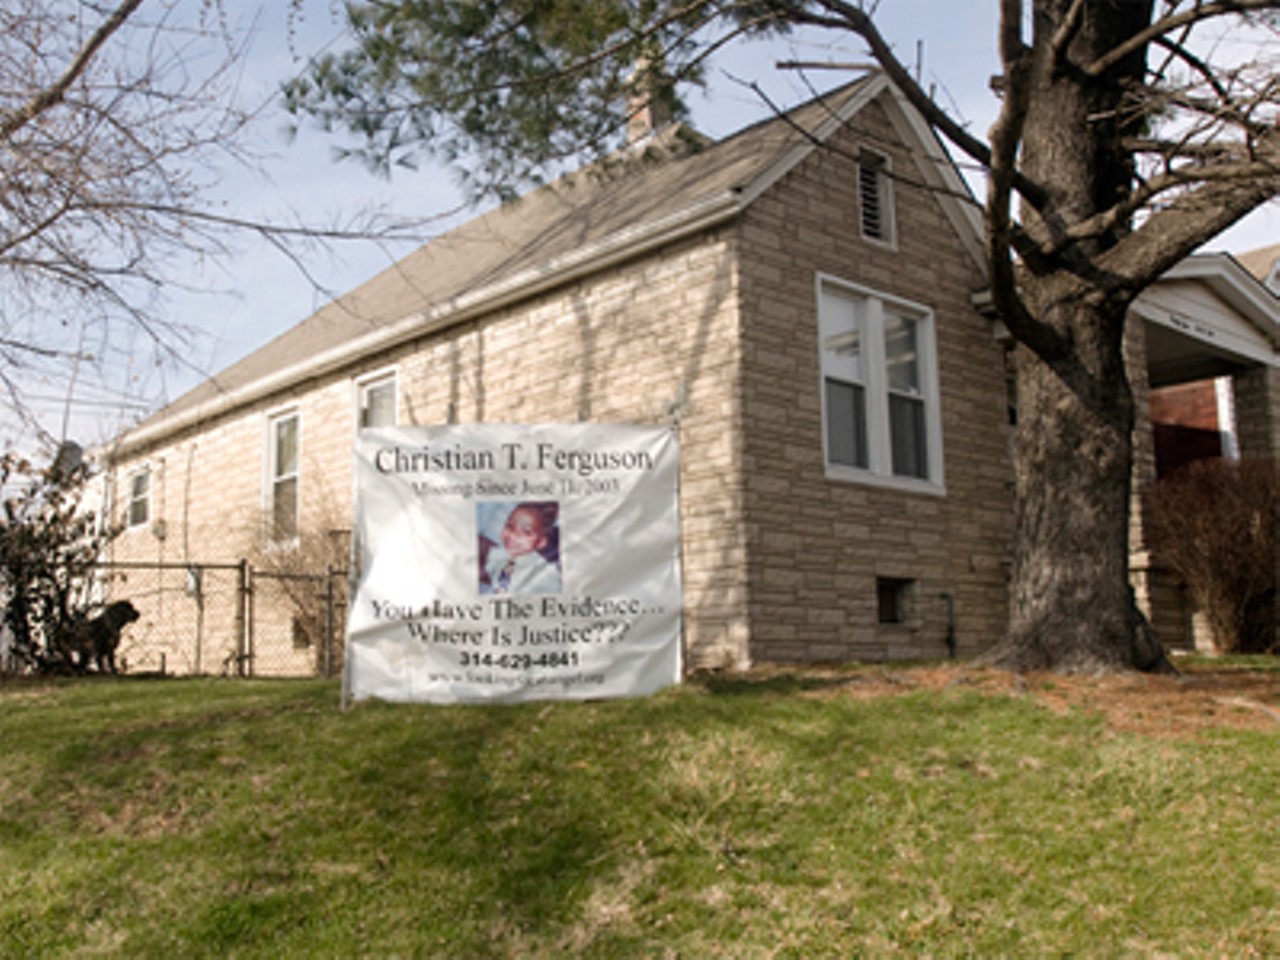 The home in which Theda Thomas and her son Connor Ferguson now live. Connor, now 14, came back into his mother's custody in 2007 after a lengthy court battle. Vanishing Act: Six years after the fact, the disappearance of nine-year-old Christian Ferguson remains a mystery. (March 18, 2009).
Vanishing Act, Part 2: Missing since 2003, little Christian Ferguson is almost surely dead. Police think they've fingered the culprit -- and there's nothing they can do about it. (March 26, 2009).